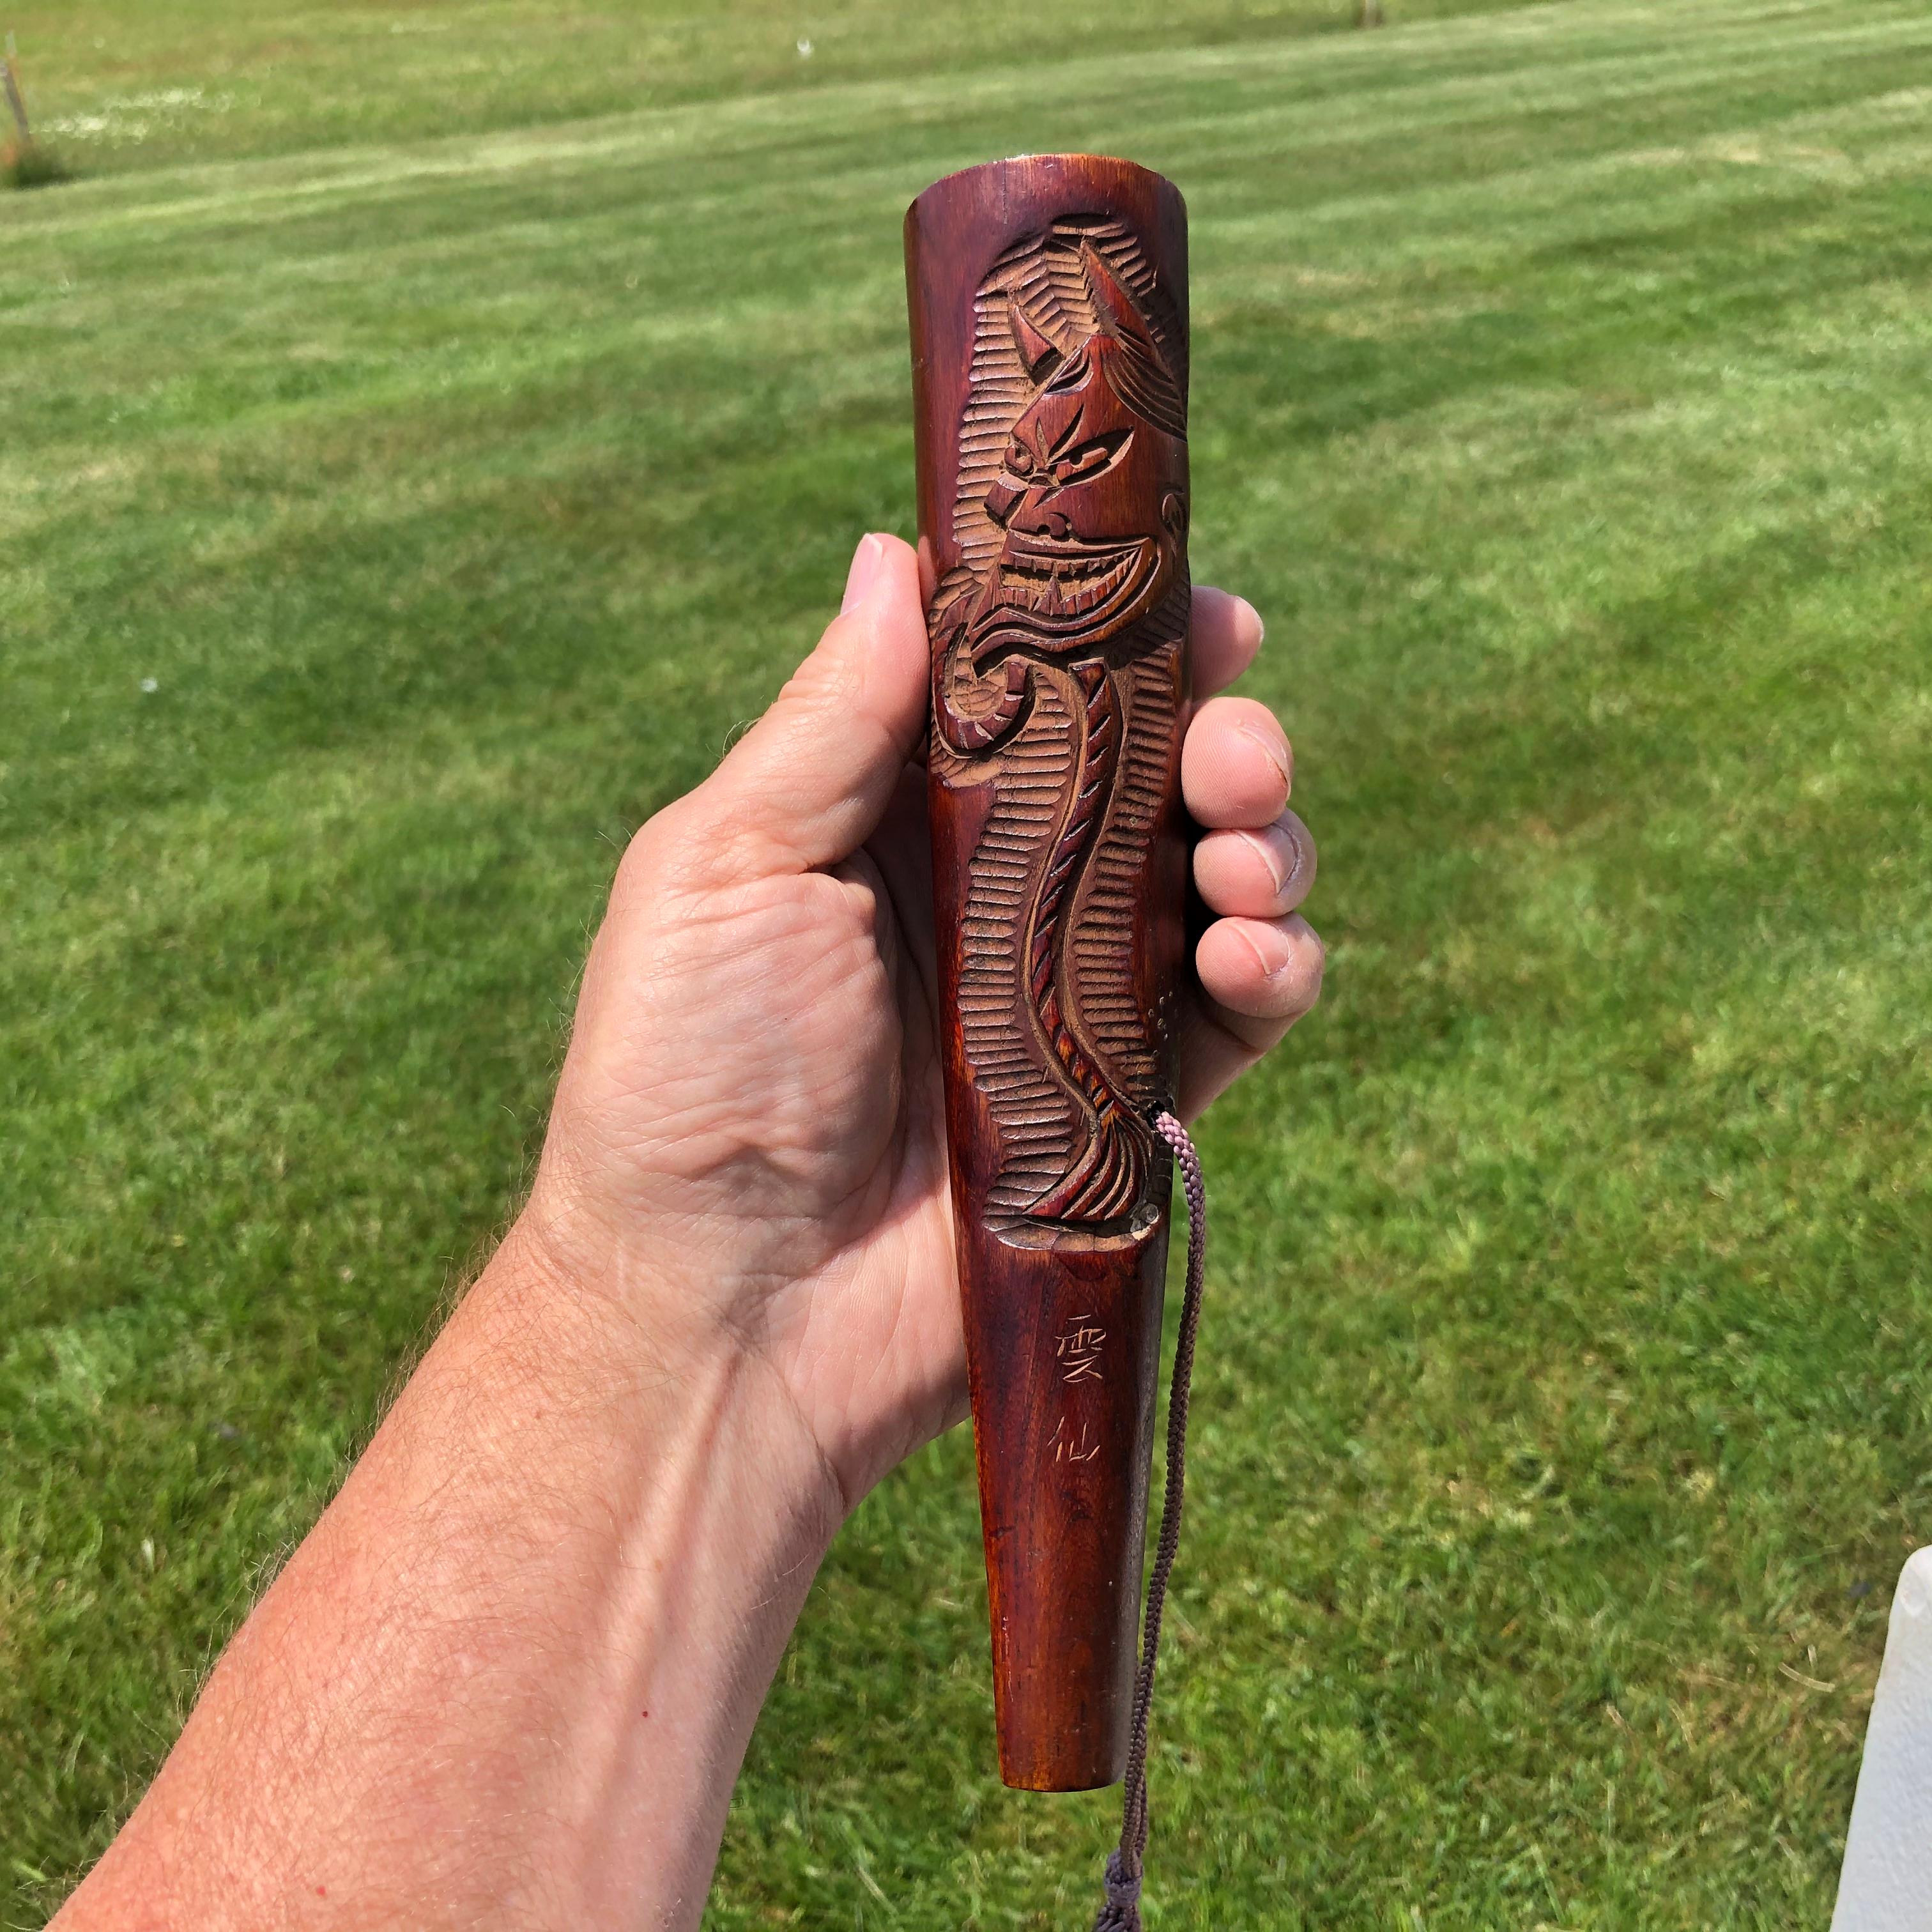 Rare find from our most recent Japanese acquisitions

This is a unique Japanese large hand carved wood kiseru Yakusa opium or tobacco pipe dating to the early 20th century and signed.

The massive pipe features a deeply incised Hanyya demon